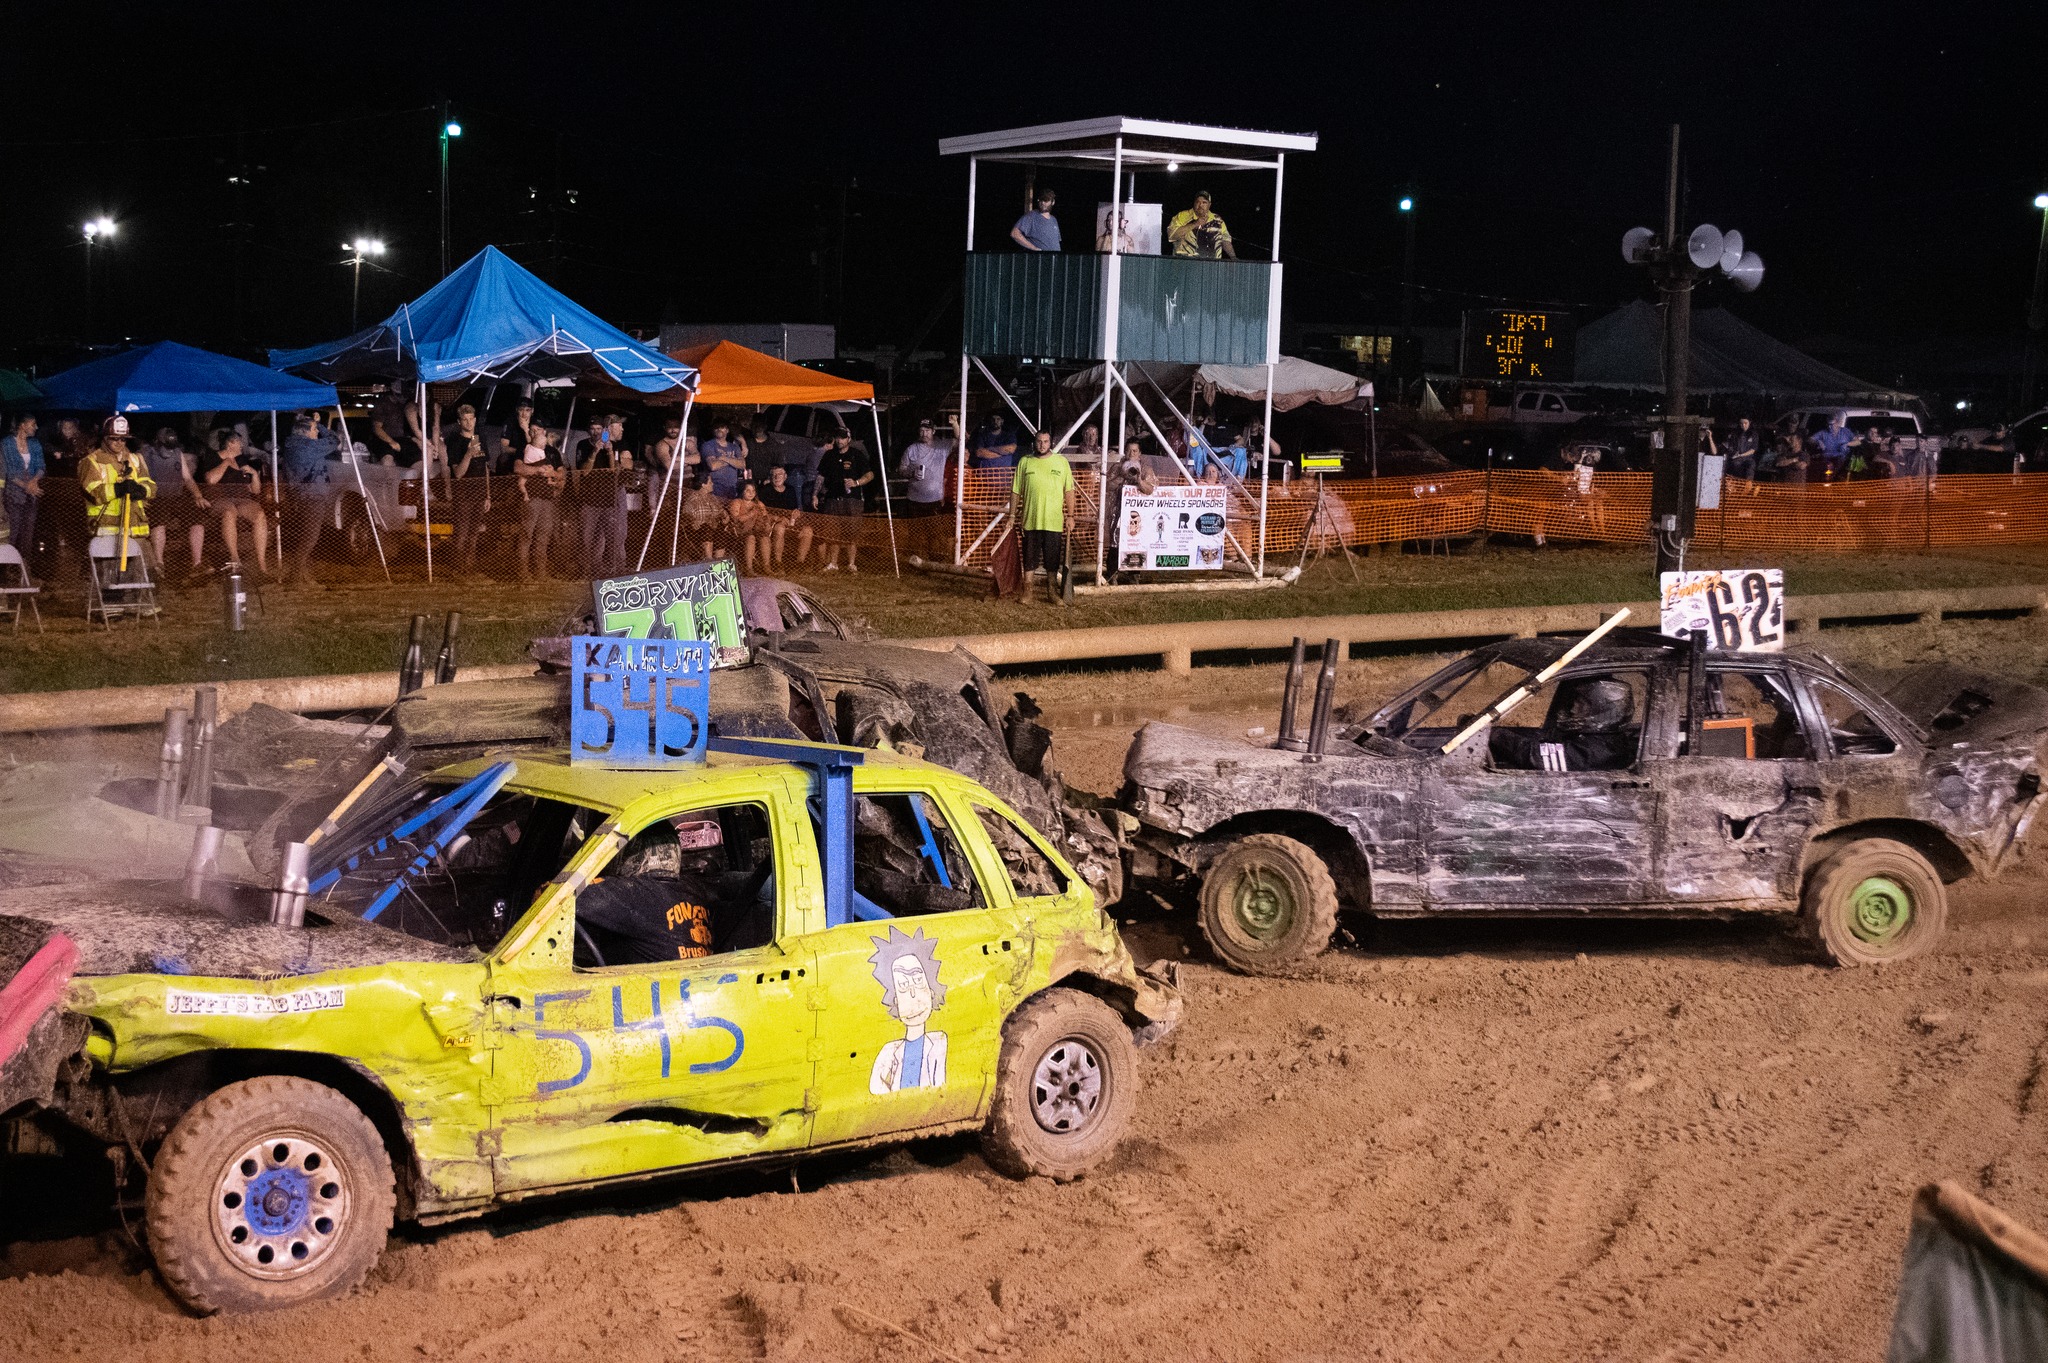 Demolition Derby at the Greene County Fair